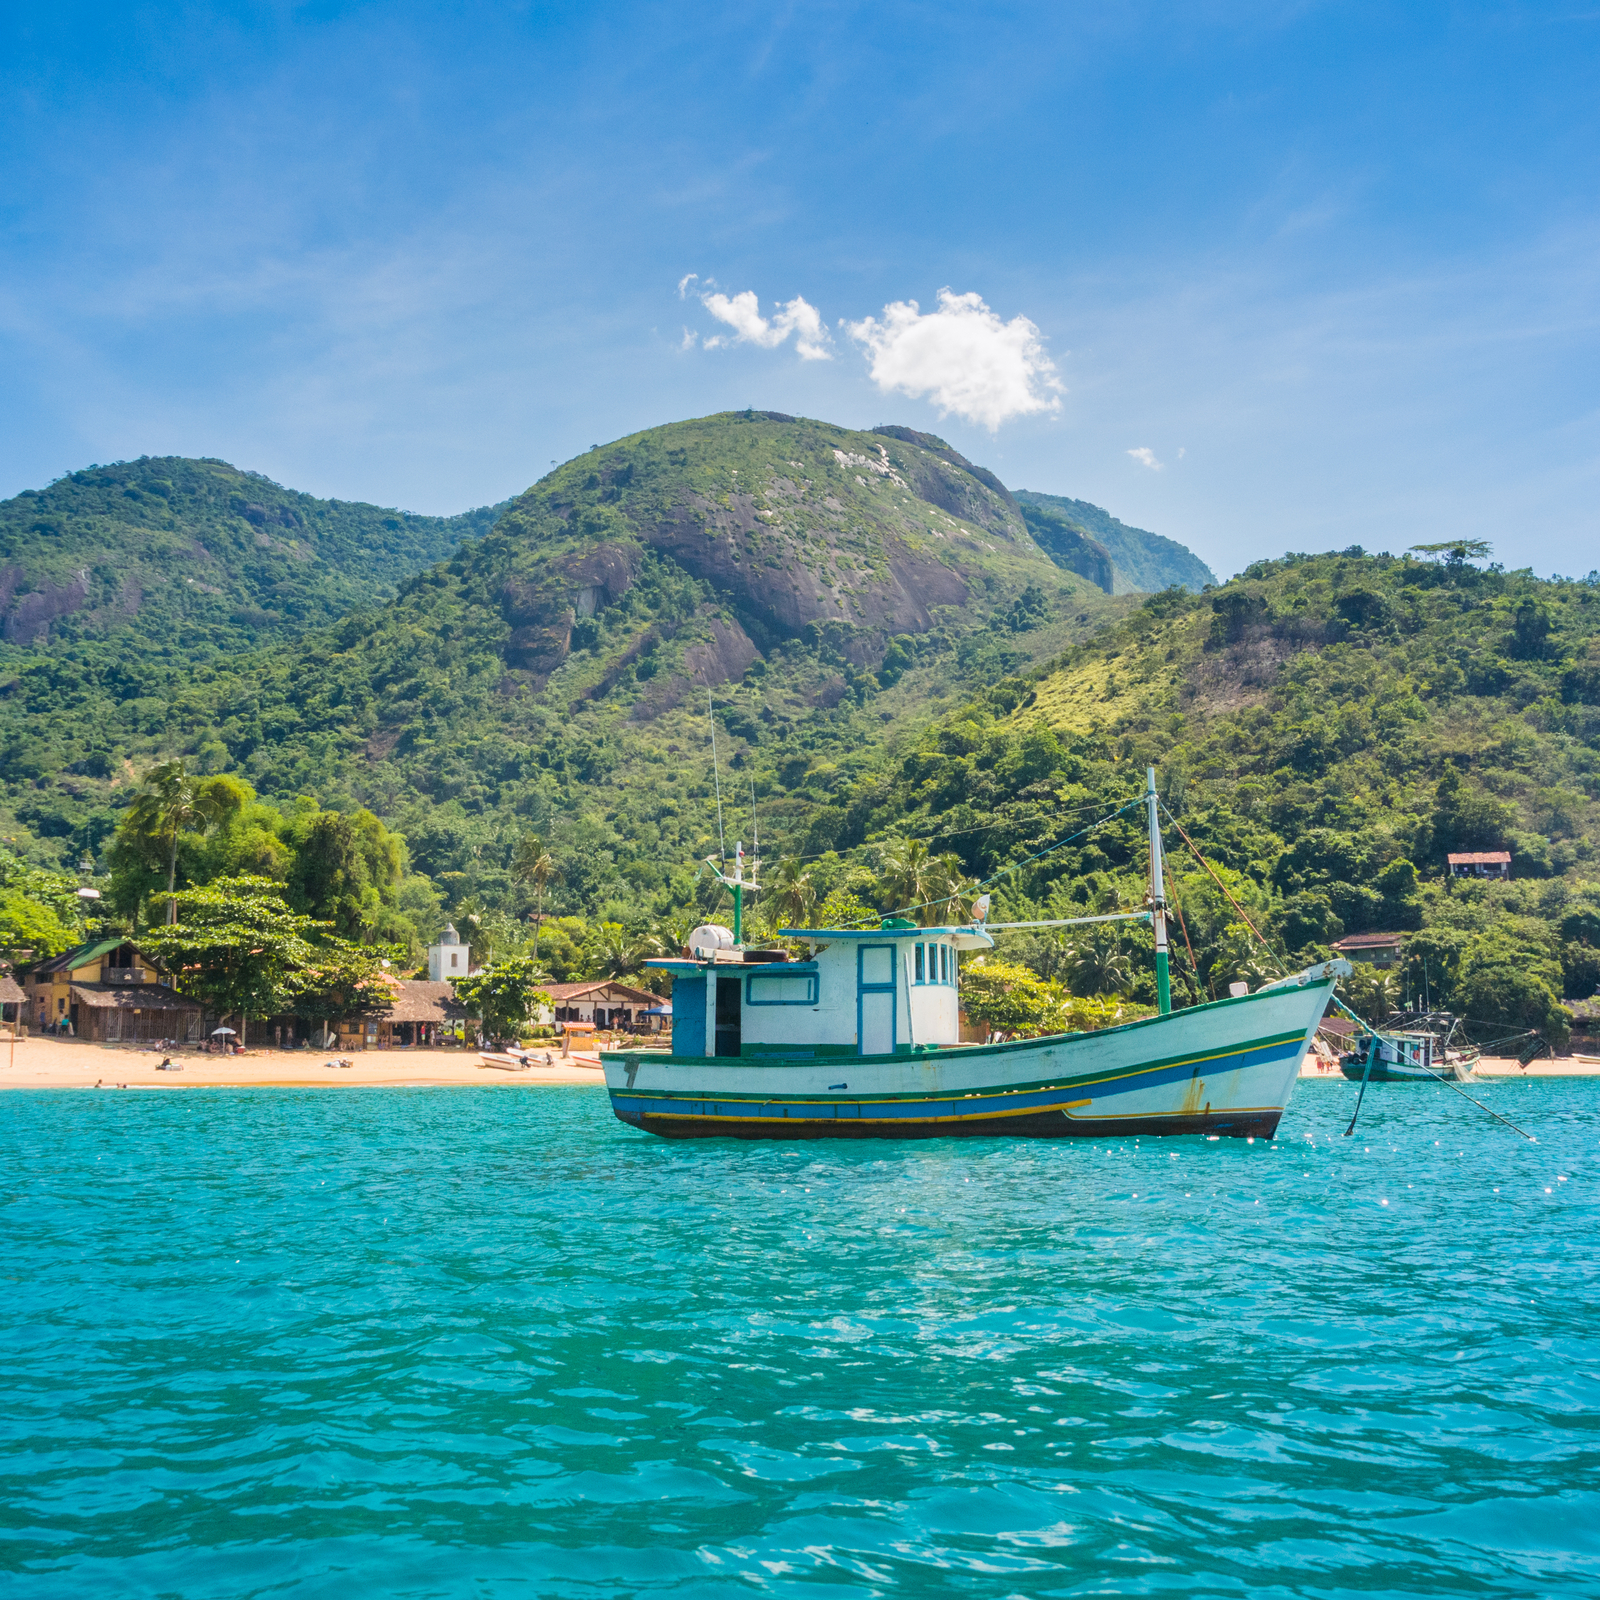 Bitcoin-Themed Hostel Opens in Scenic Brazilian Town of Paraty